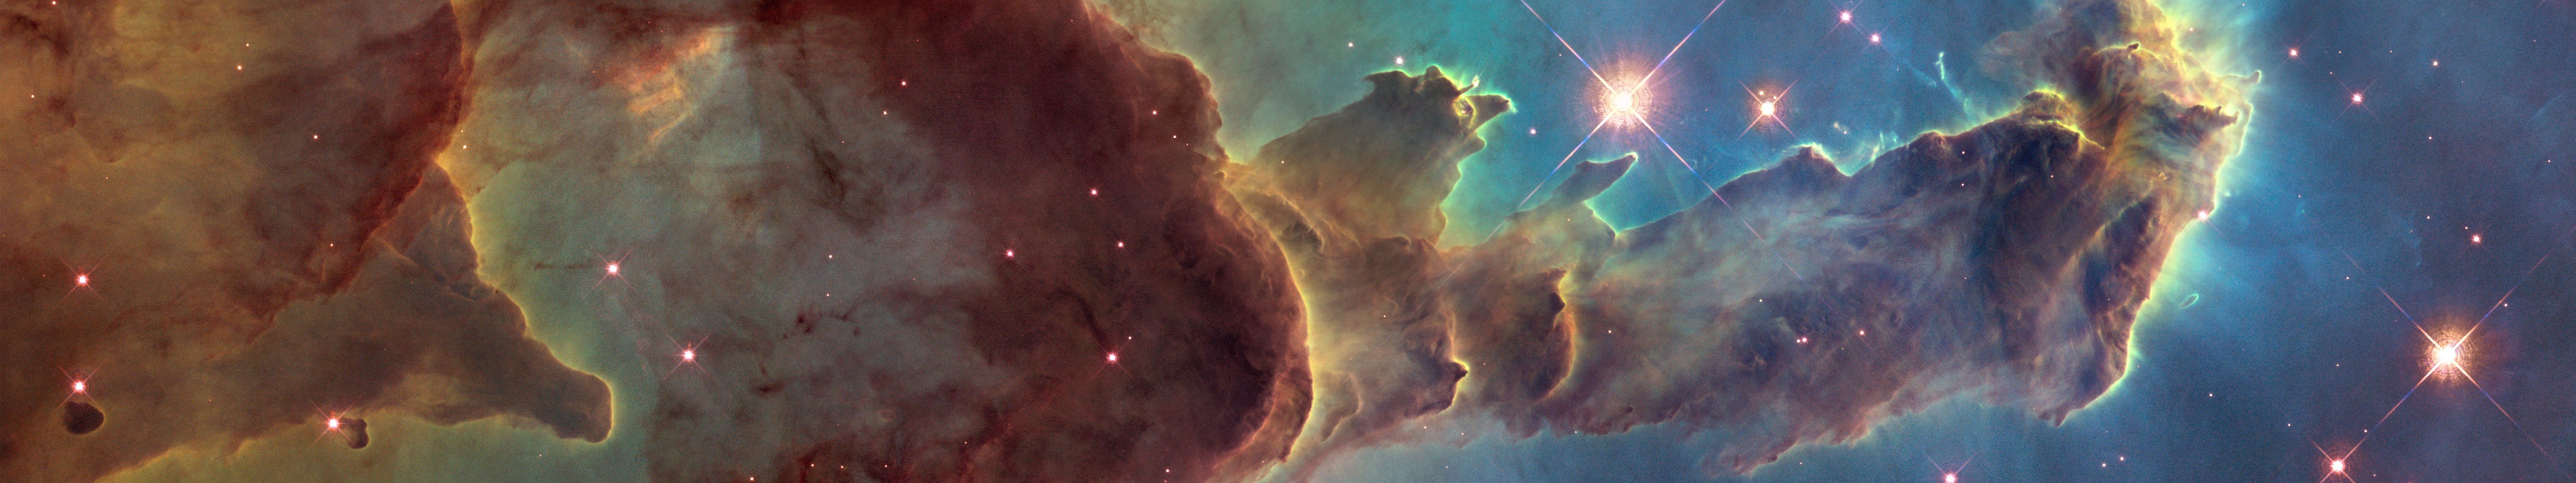 Pillars of Creation by scenesbycolleen on DeviantArt  Outer space art  Hubble pictures Space art